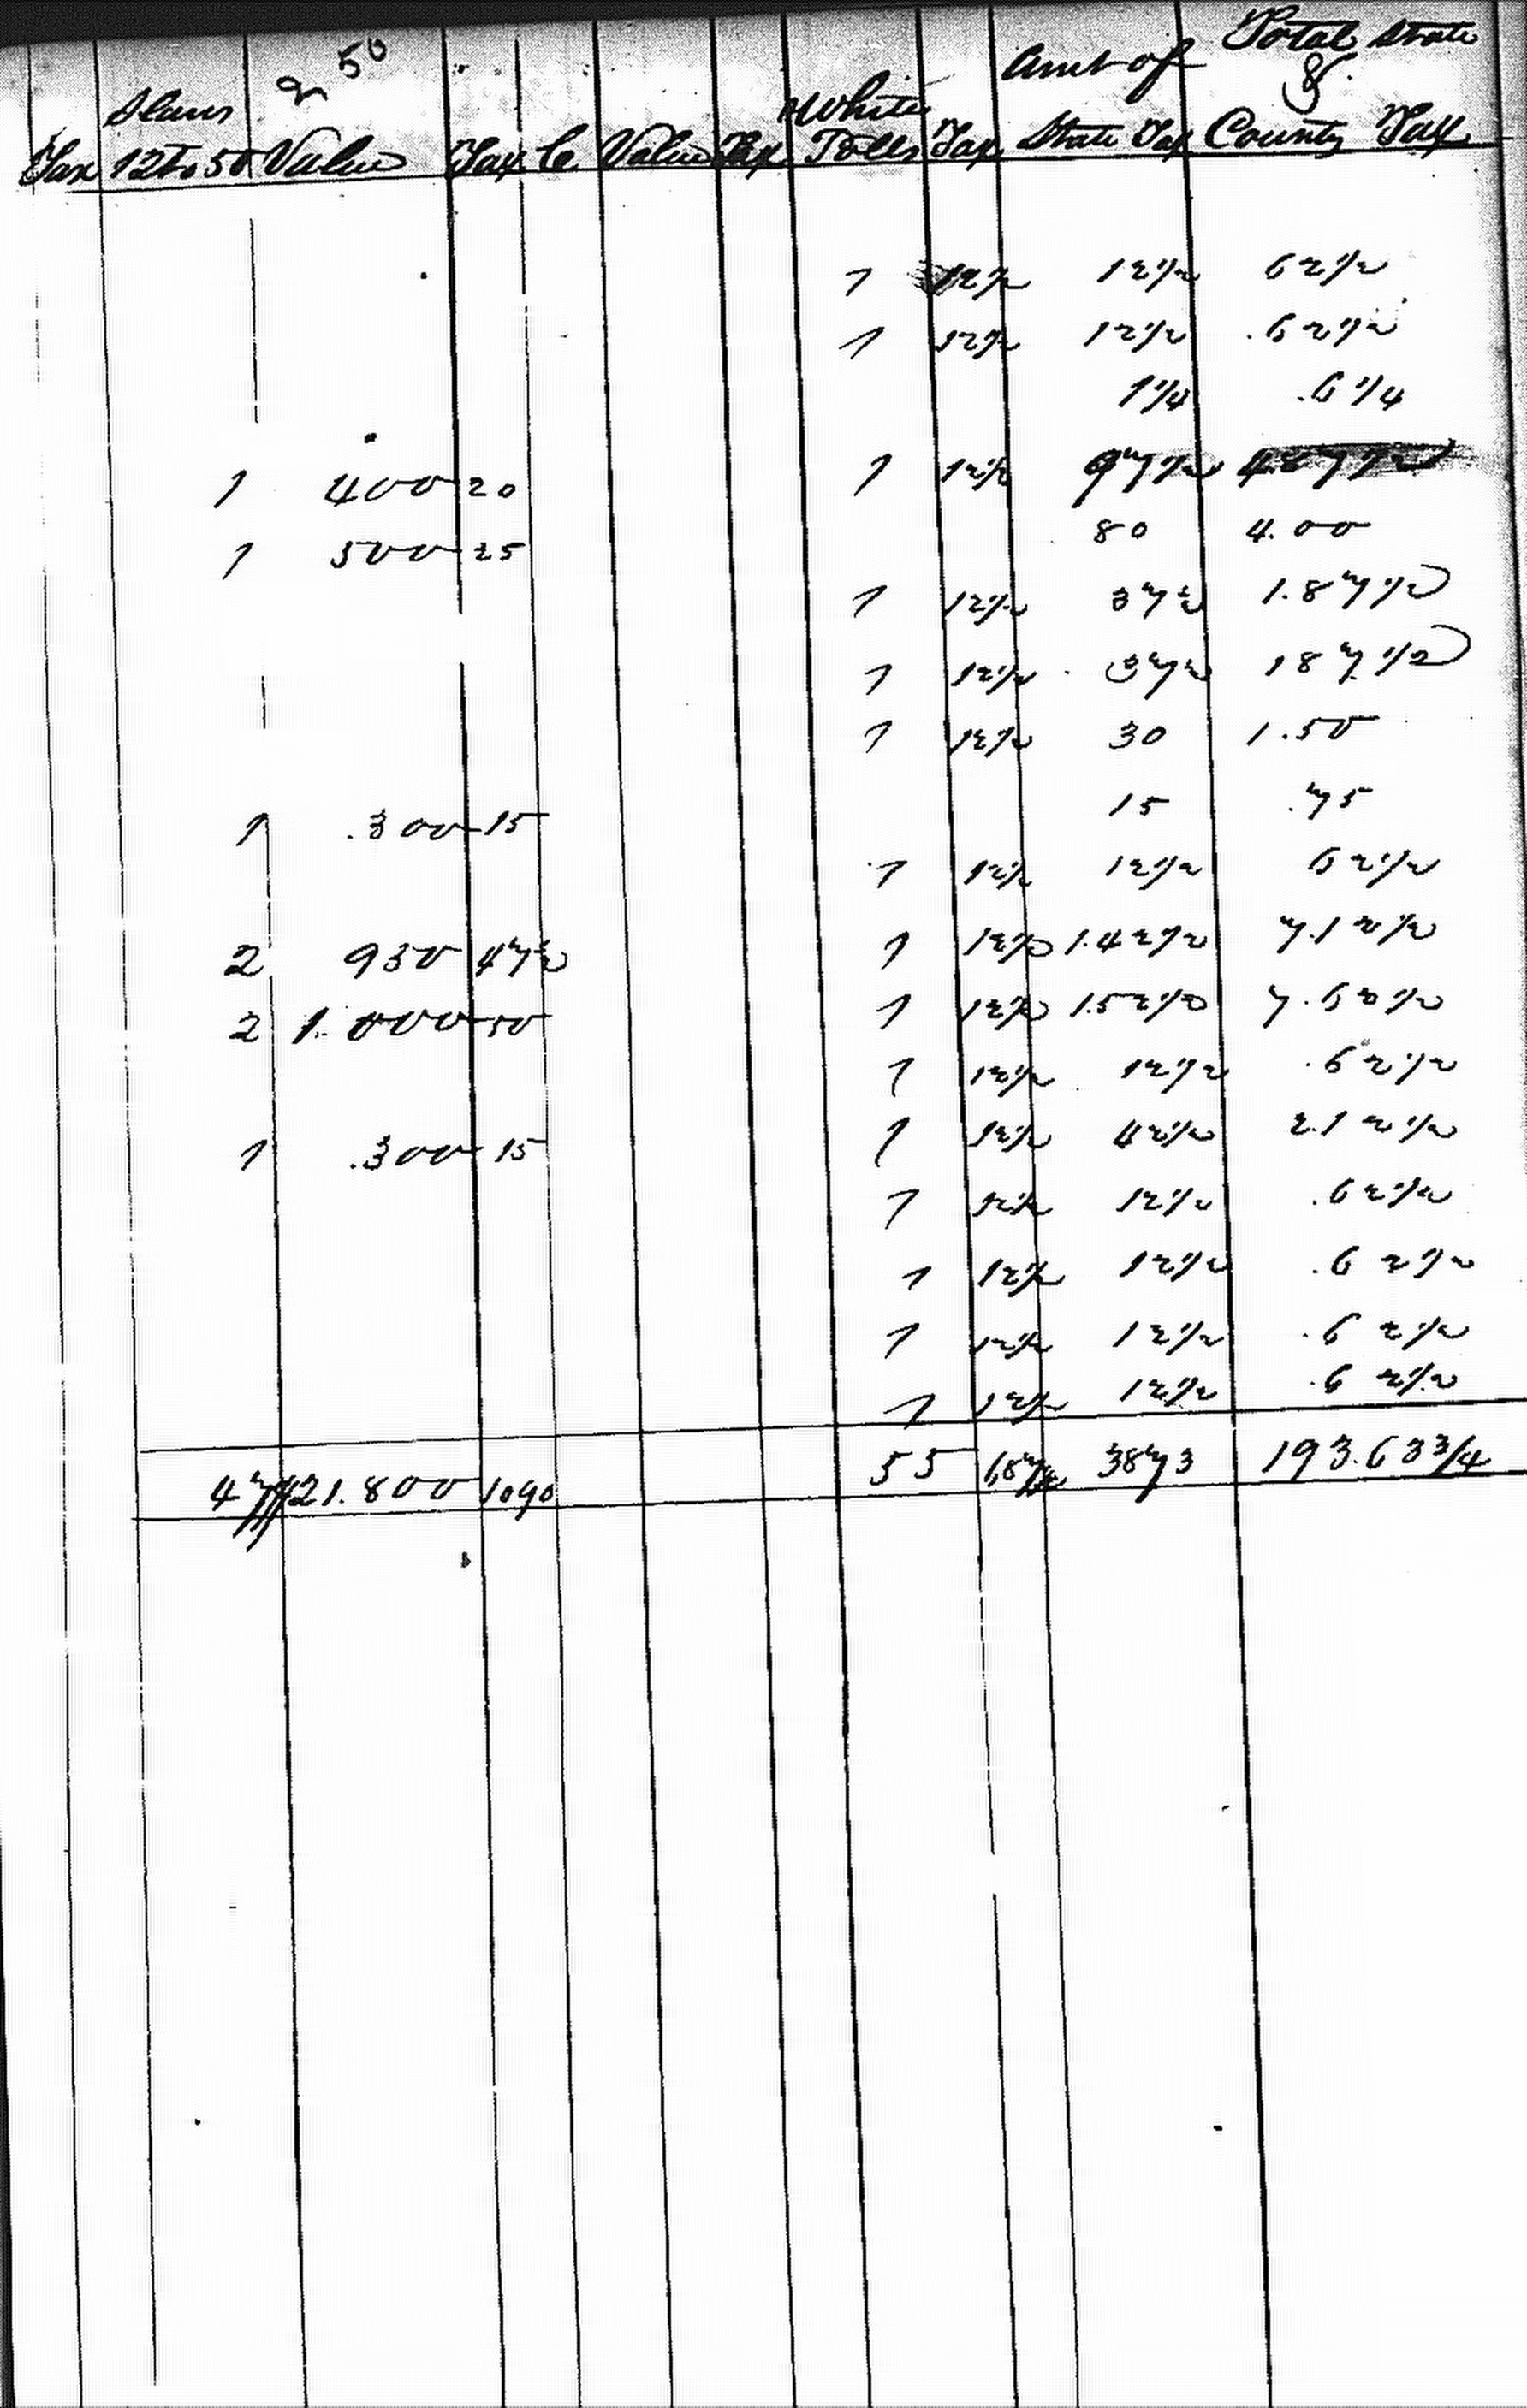 Anderson County Taxes, 1840, District 8, right half of first page